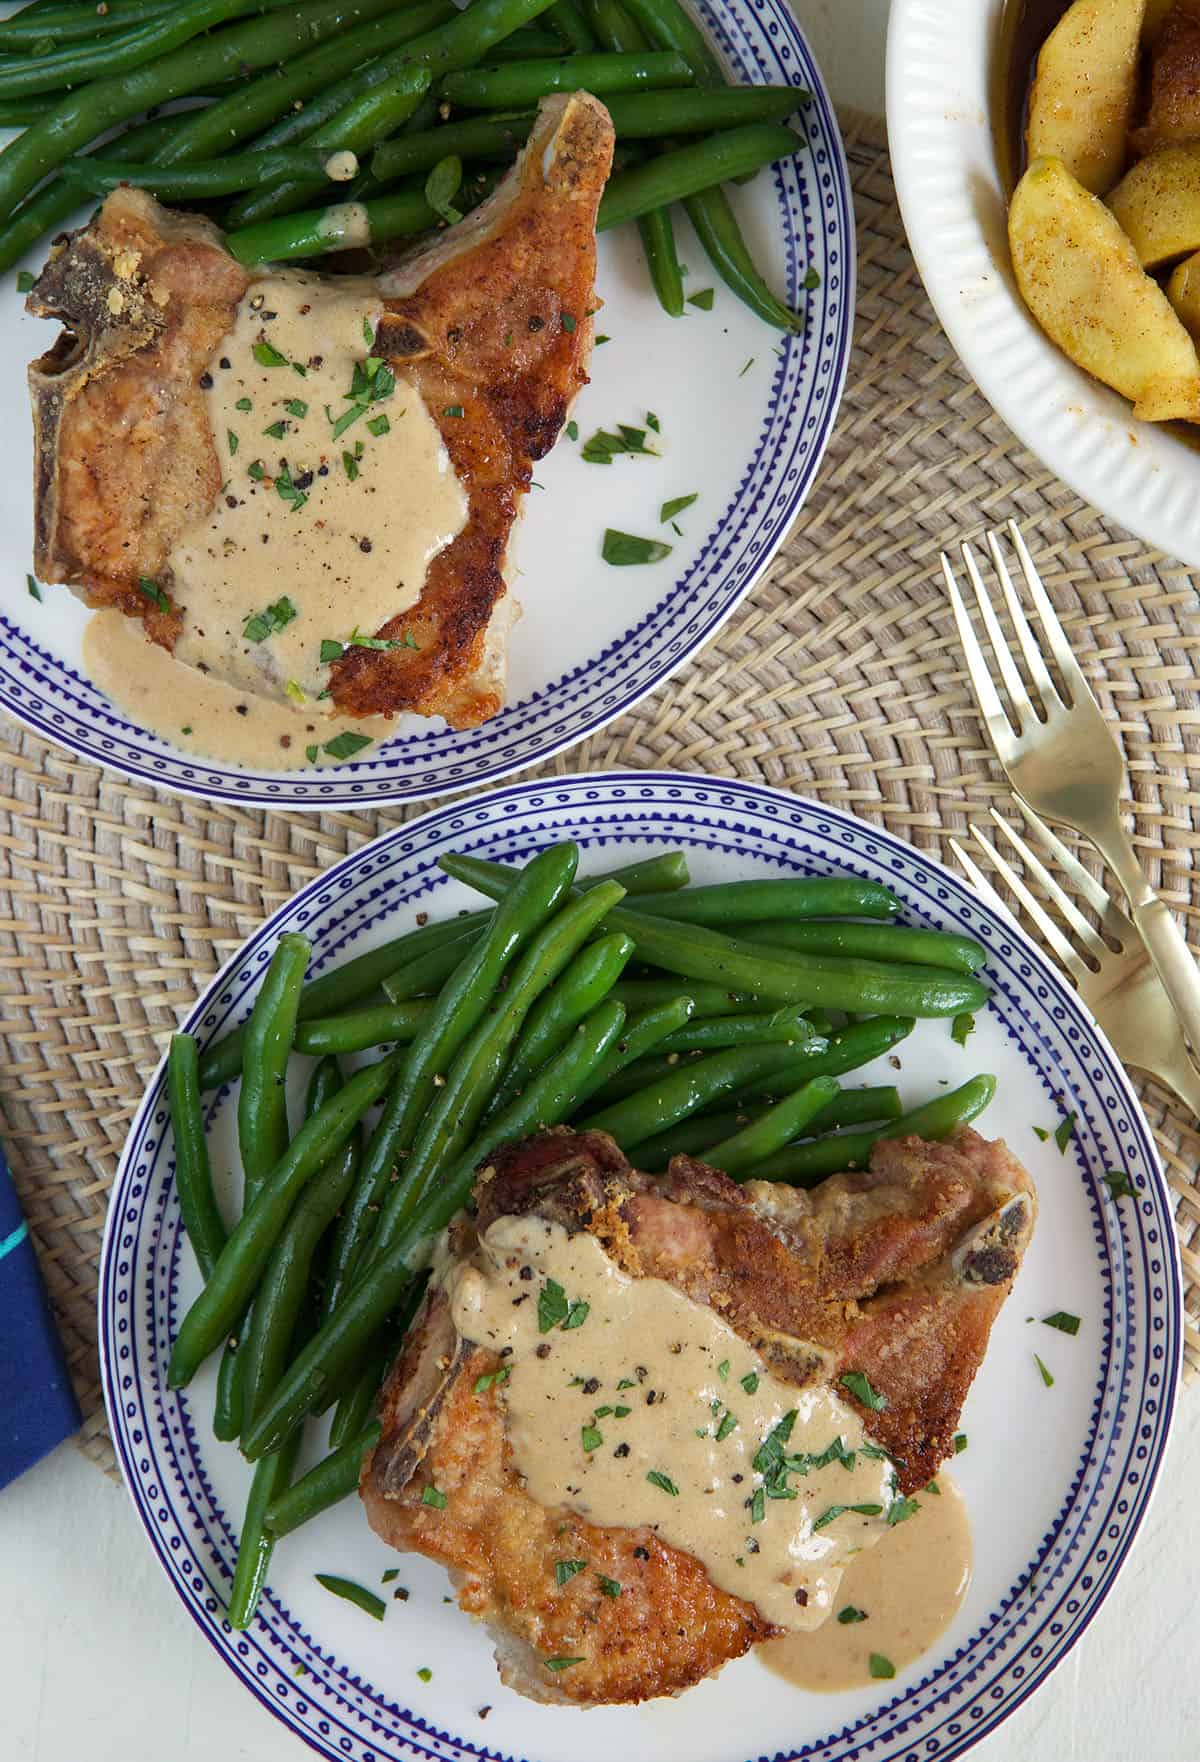 Gravy covered pork chops are placed next to green beans on a plate.